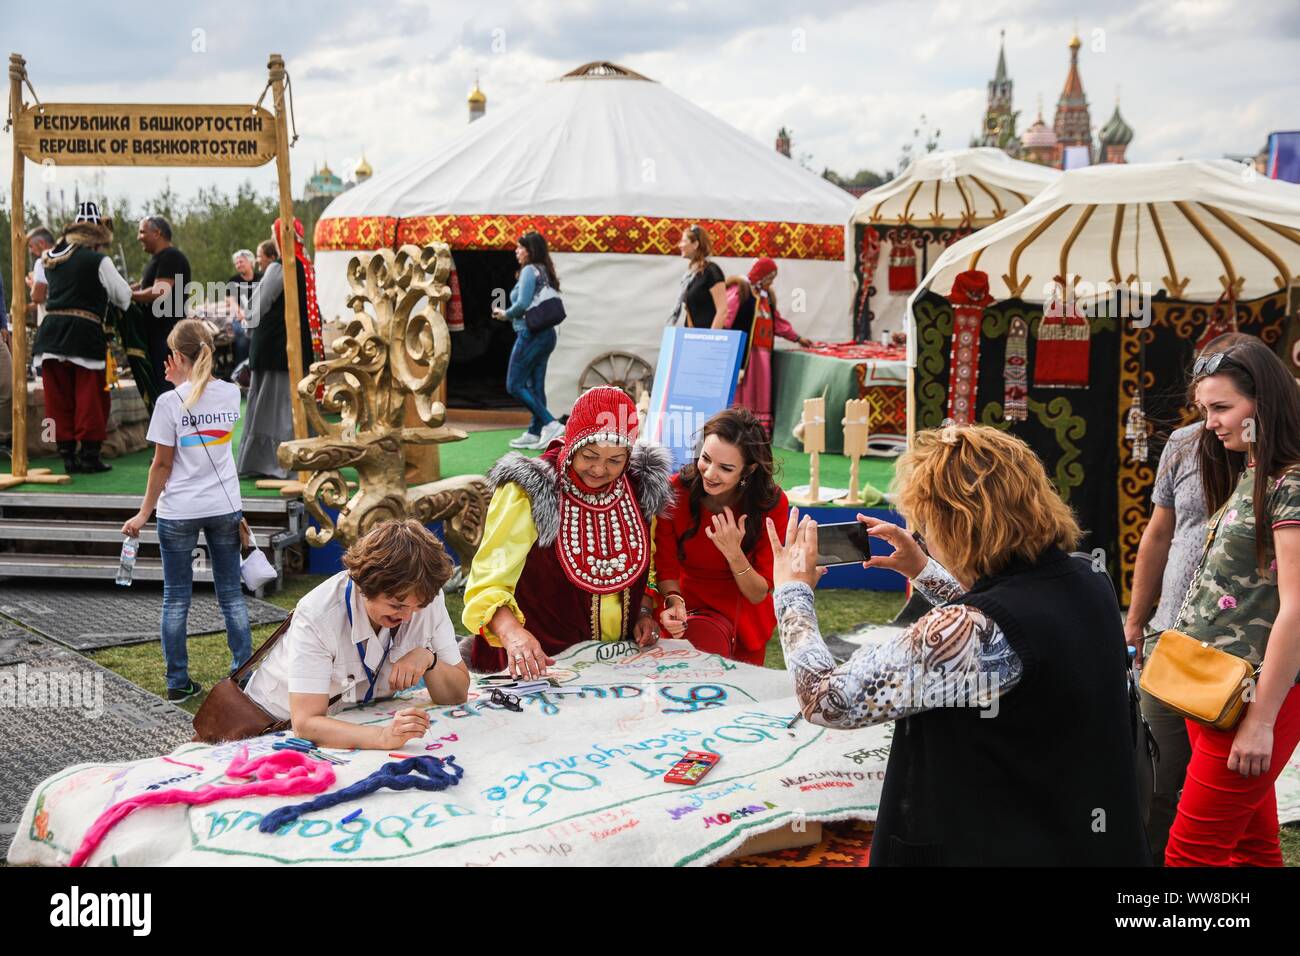 Moscow, Russia. 13th Sep, 2019. People participate in a masterclass at the site of Bashkortostan Republic during the Russian Geographical Society Festival at Zaryadye park in Moscow, Russia, on Sept. 13, 2019. The 4th Russian Geographical Society Festival is held from Sept. 13 to Sept. 22 in Moscow. Visitors will be able to get acquainted with the diverse nature and cultural heritage of Russia during the festival. Credit: Maxim Chernavsky/Xinhua Stock Photo